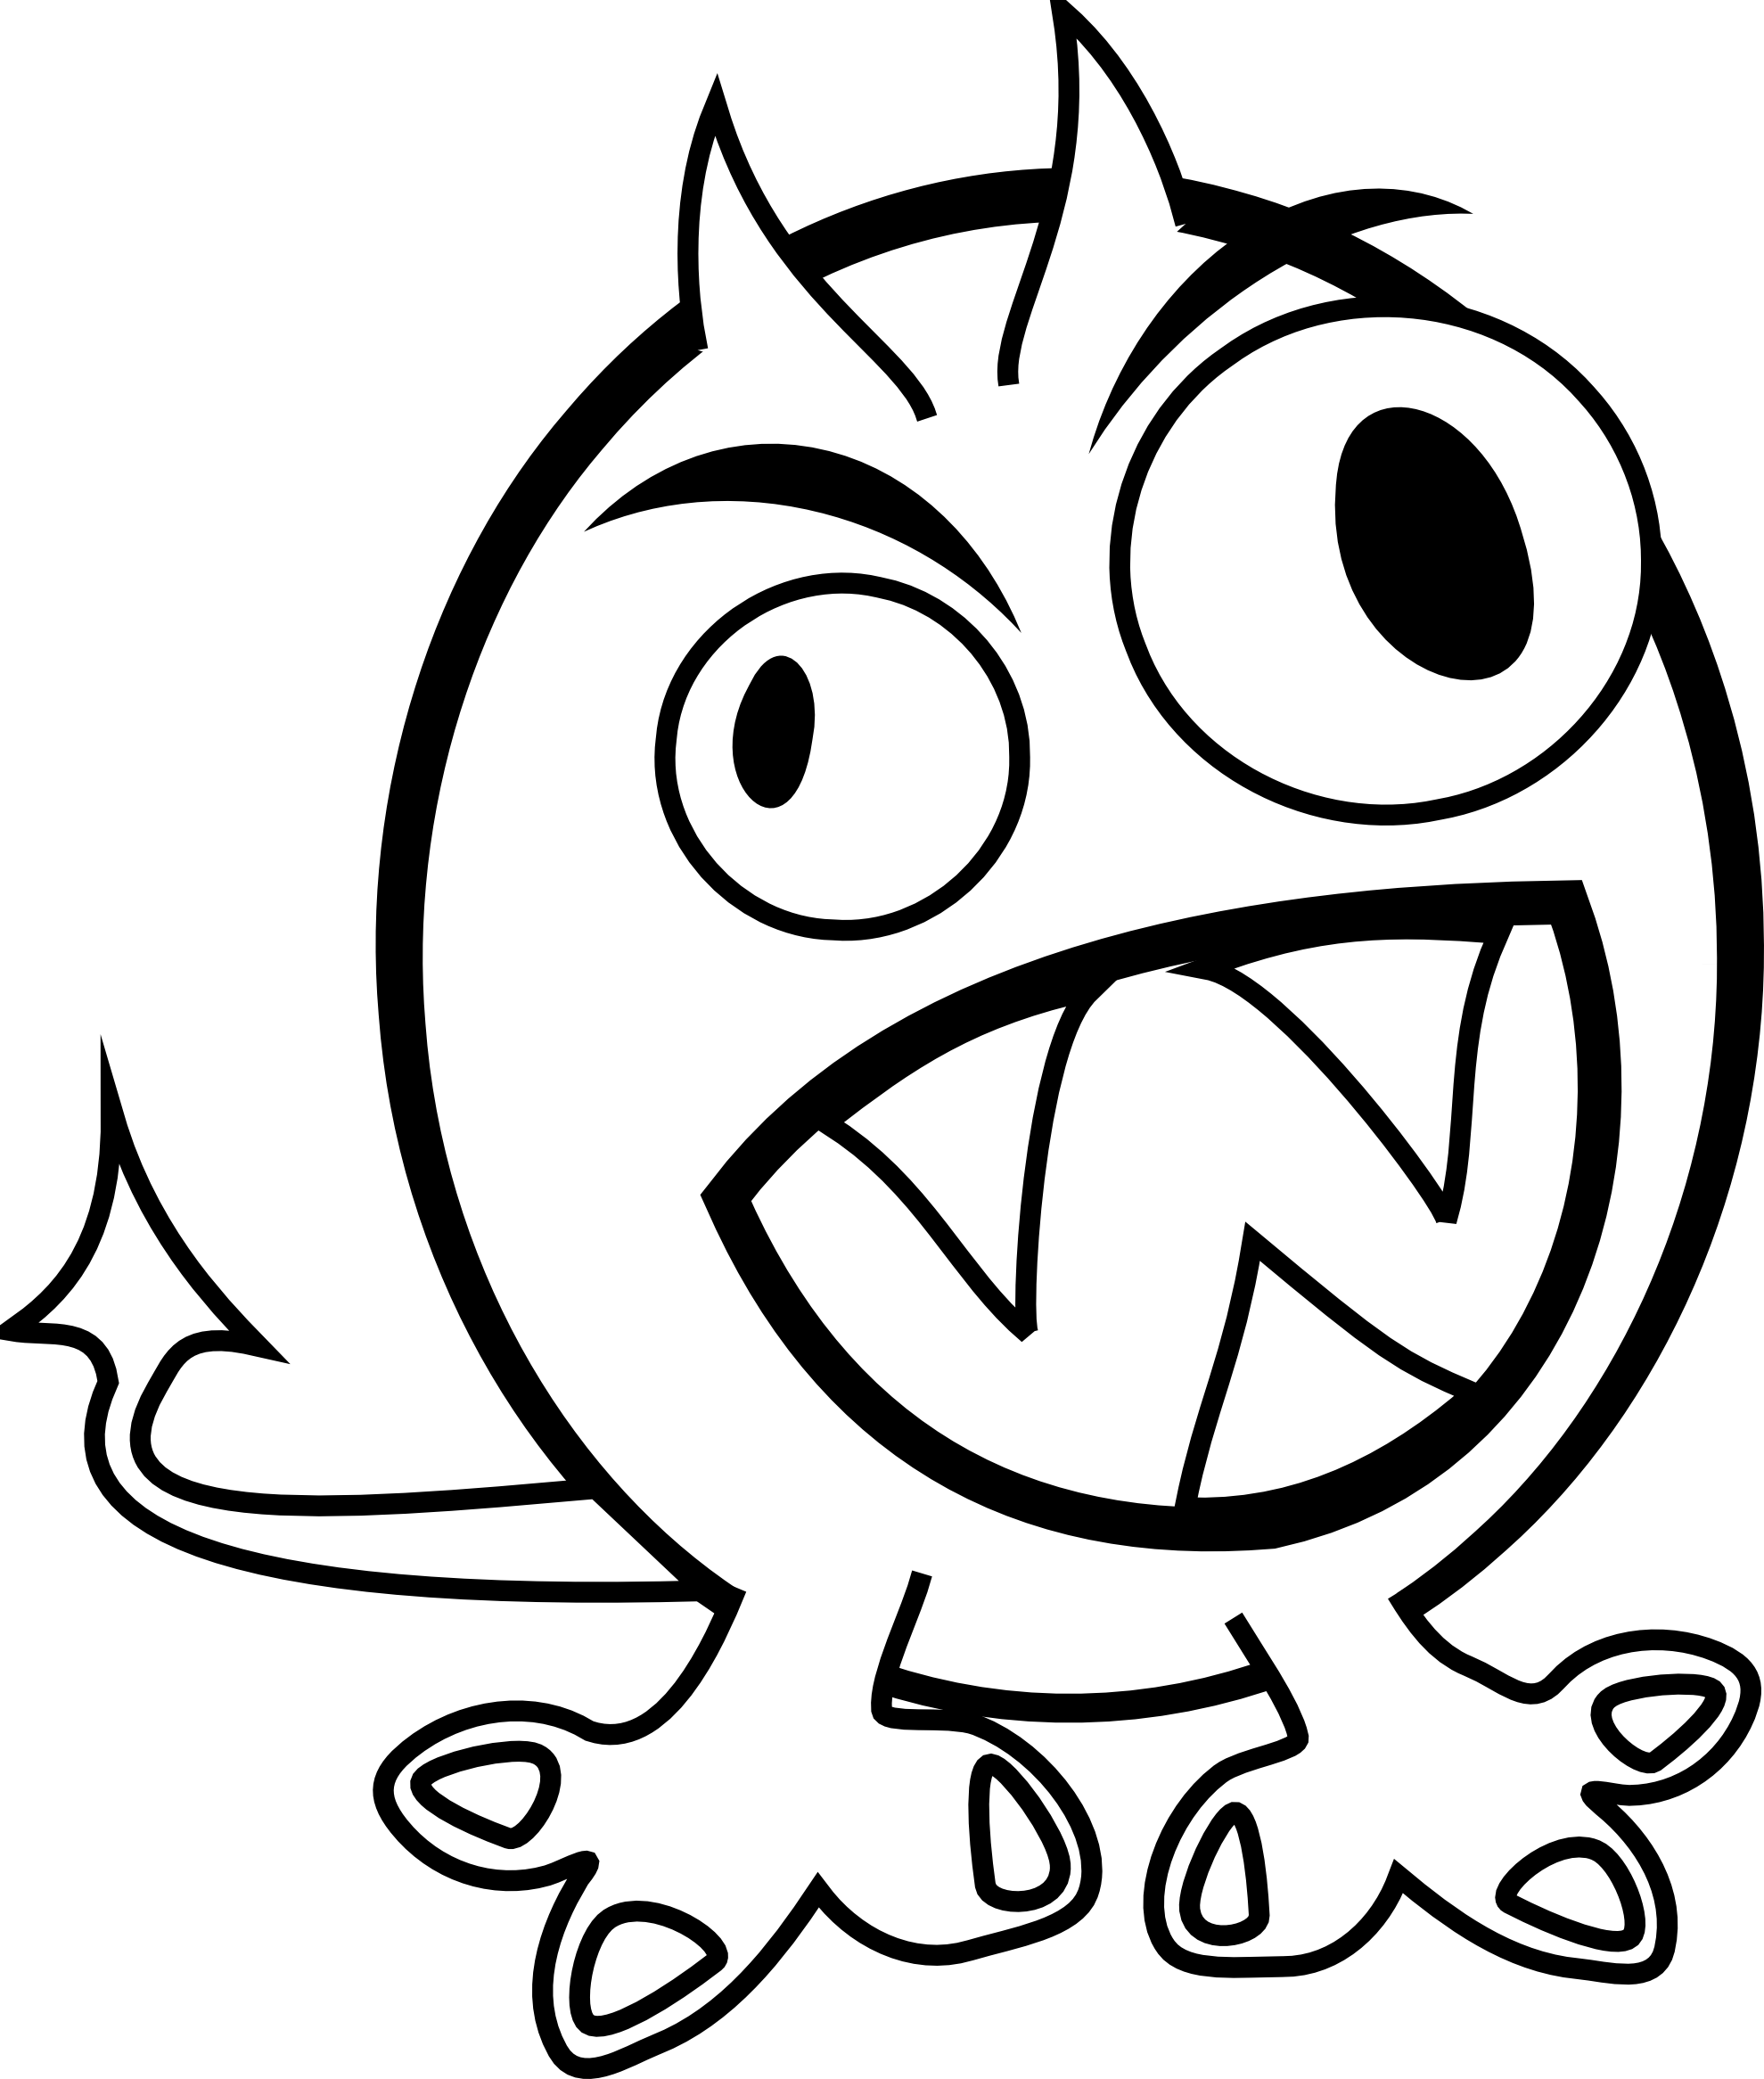 crazy clipart black and white